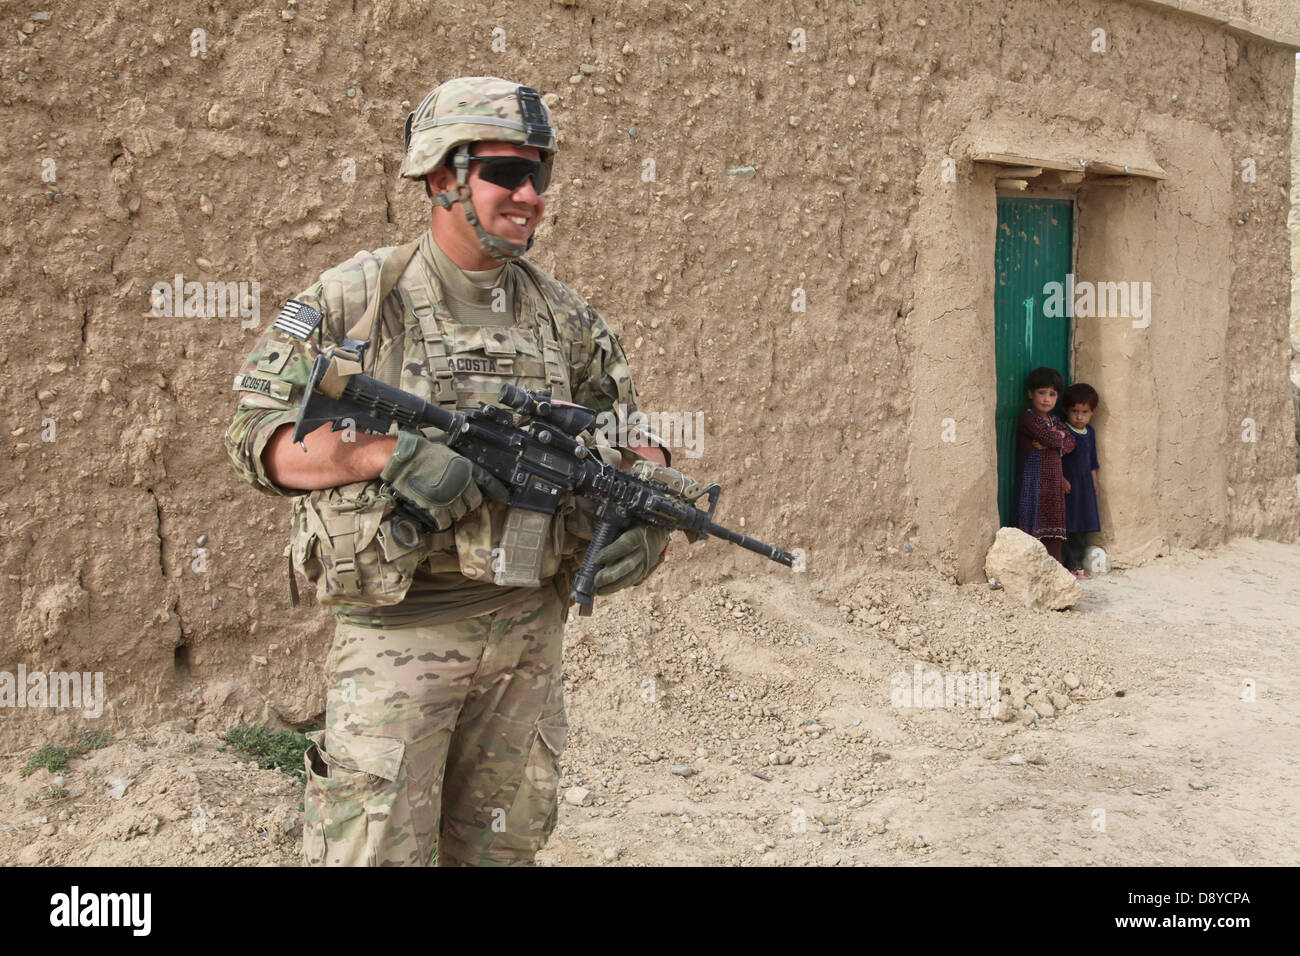 US Army Spc. Nate Acosta provides security during an operation near Forward Operating Base Shank as children watch May 25, 2013 in Logar province, Afghanistan. Stock Photo